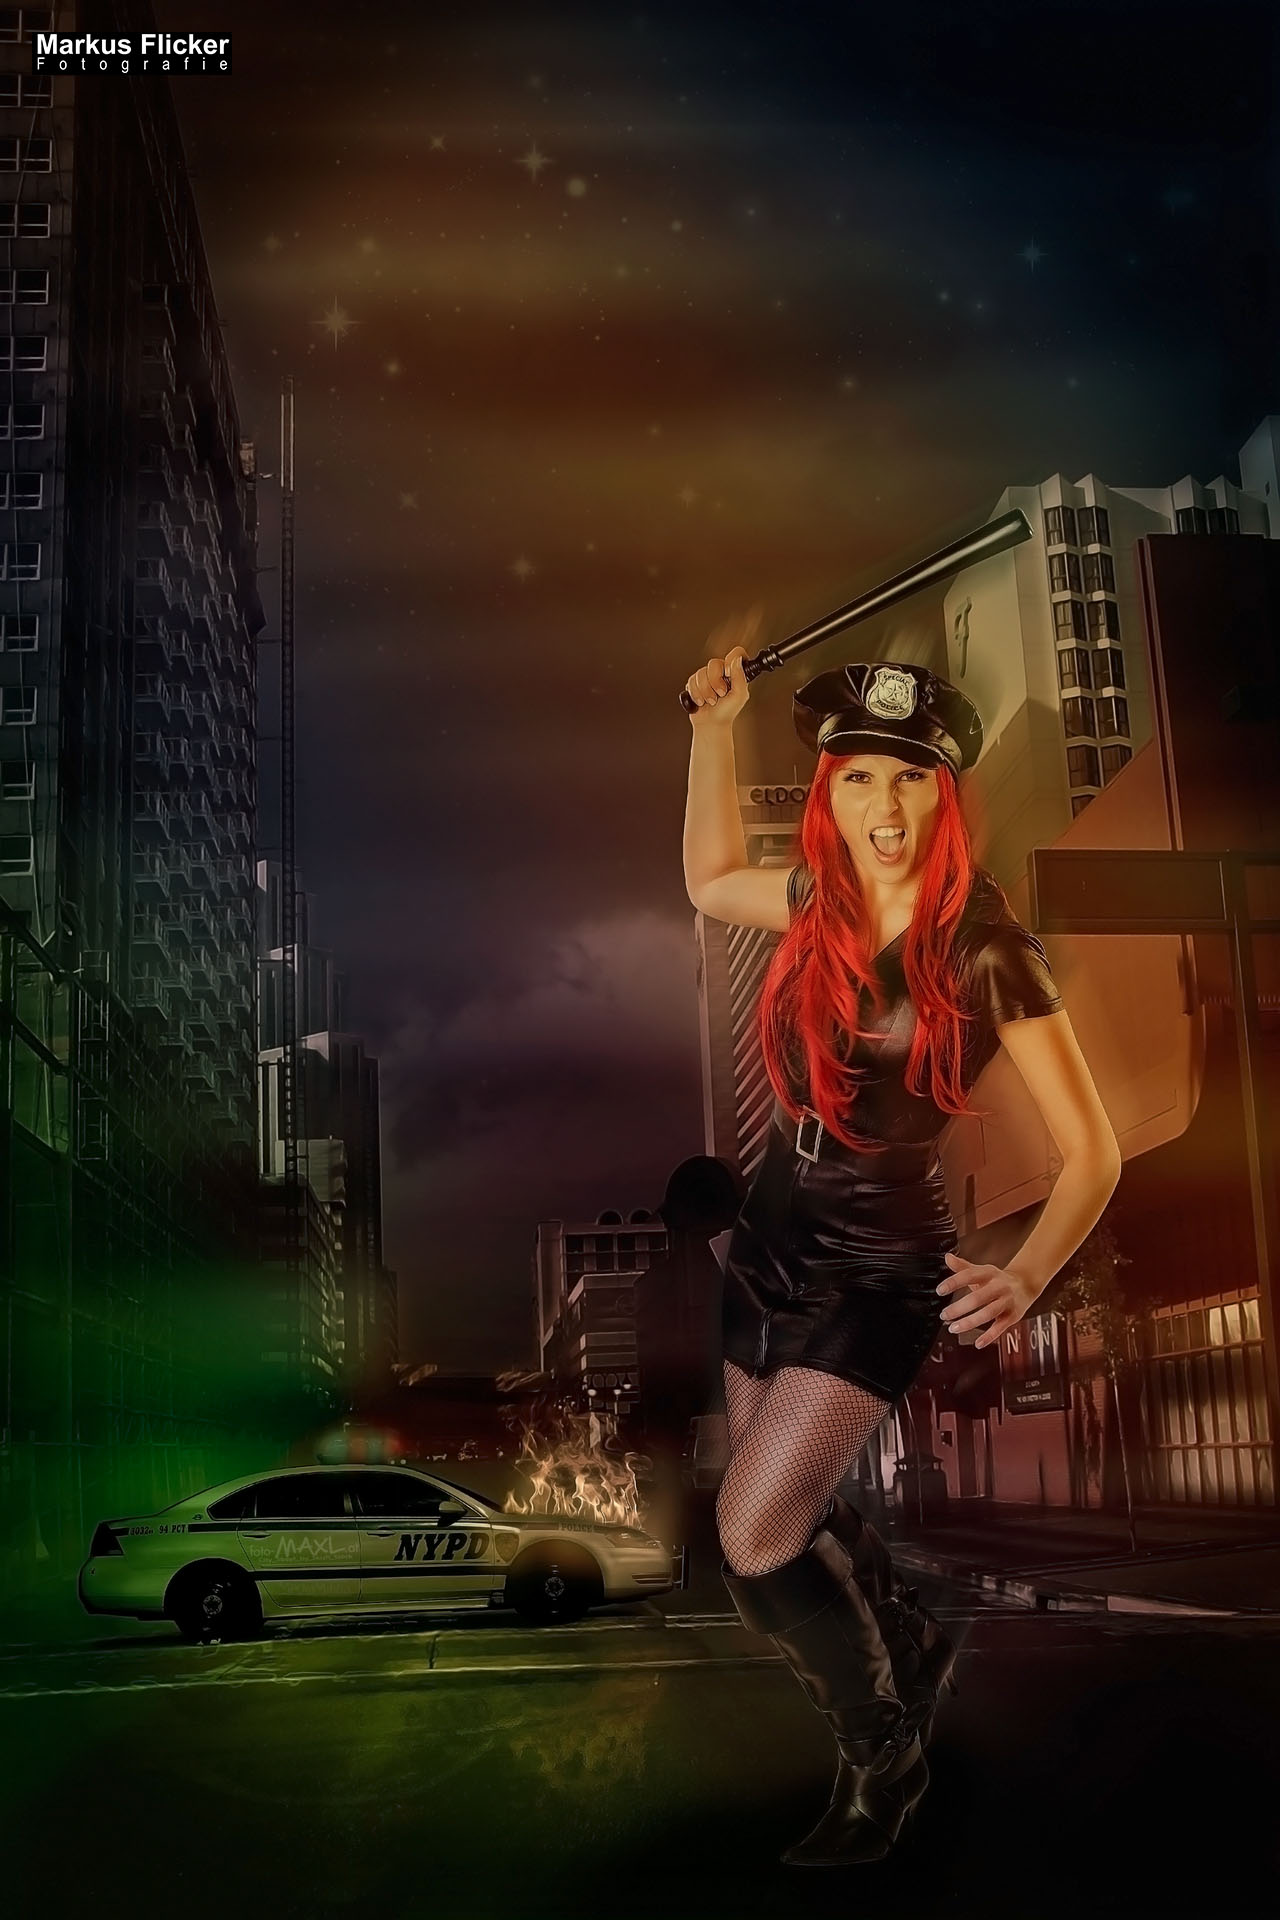 Female Police Office Photoshop Compositing DigiArt Fantasy Halloween